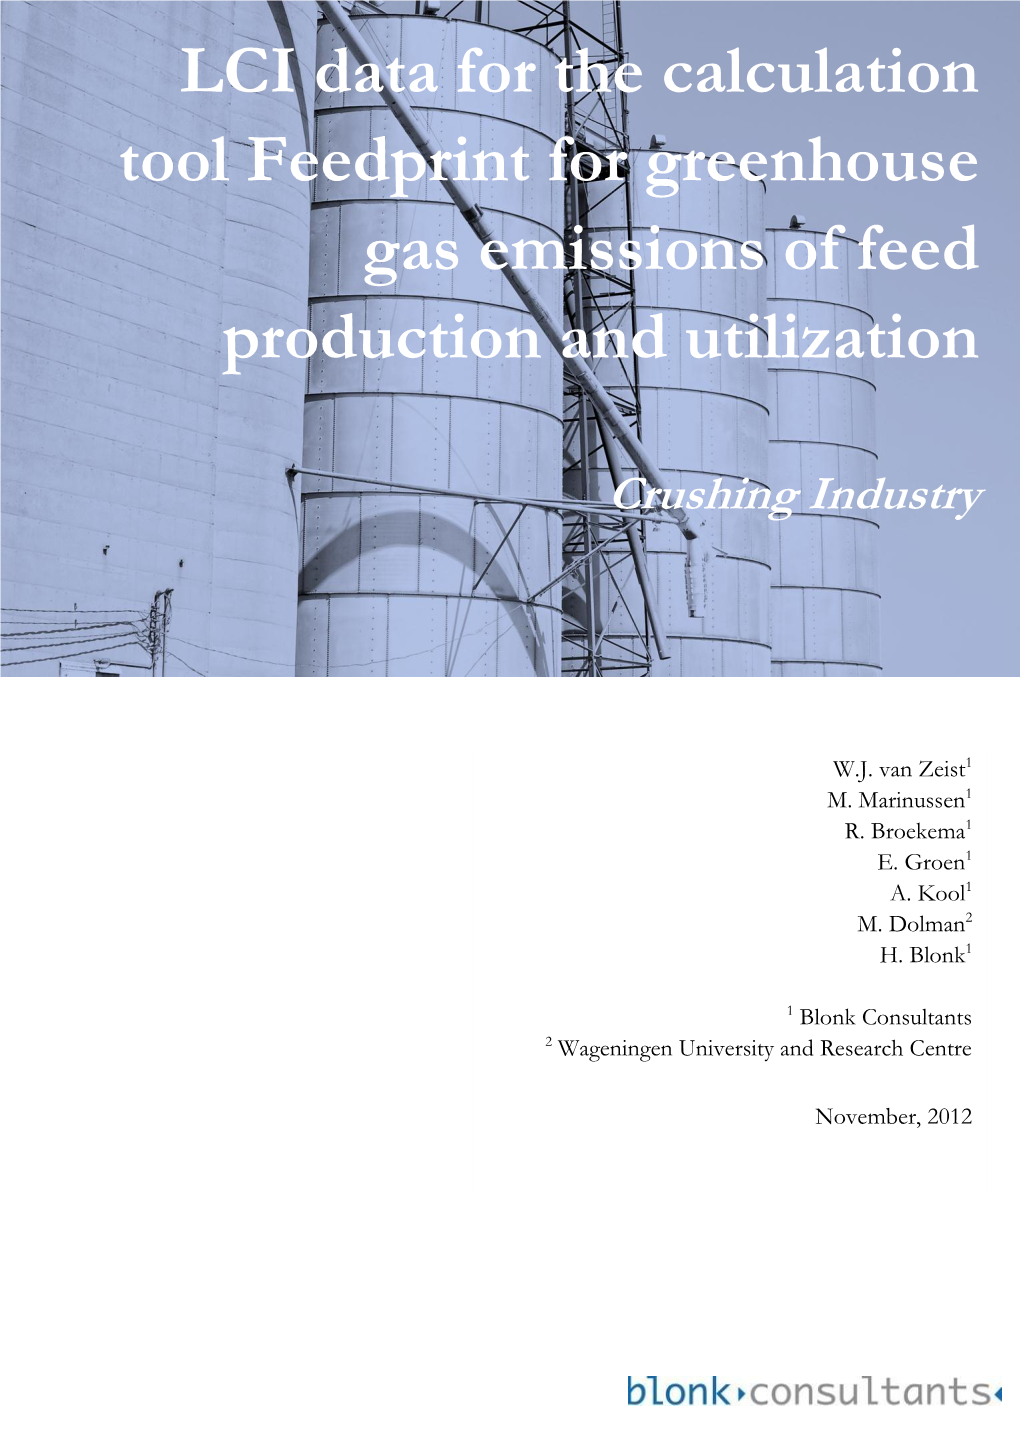 LCI Data for the Calculation Tool Feedprint for Greenhouse Gas Emissions of Feed Production and Utilization